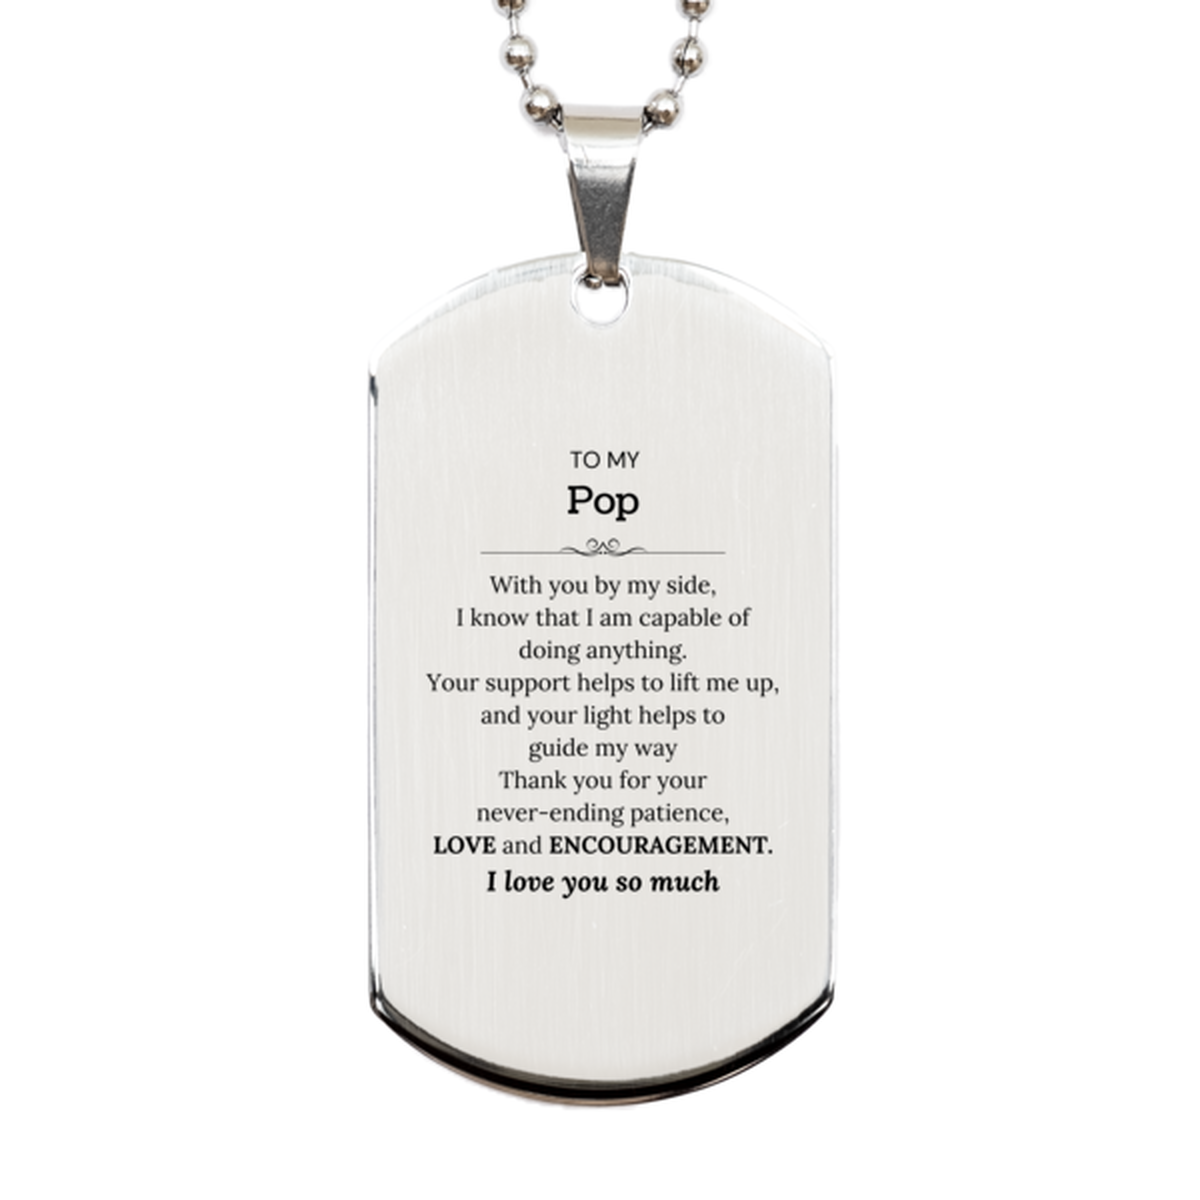 Appreciation Pop Silver Dog Tag Gifts, To My Pop Birthday Christmas Wedding Keepsake Gifts for Pop With you by my side, I know that I am capable of doing anything. I love you so much